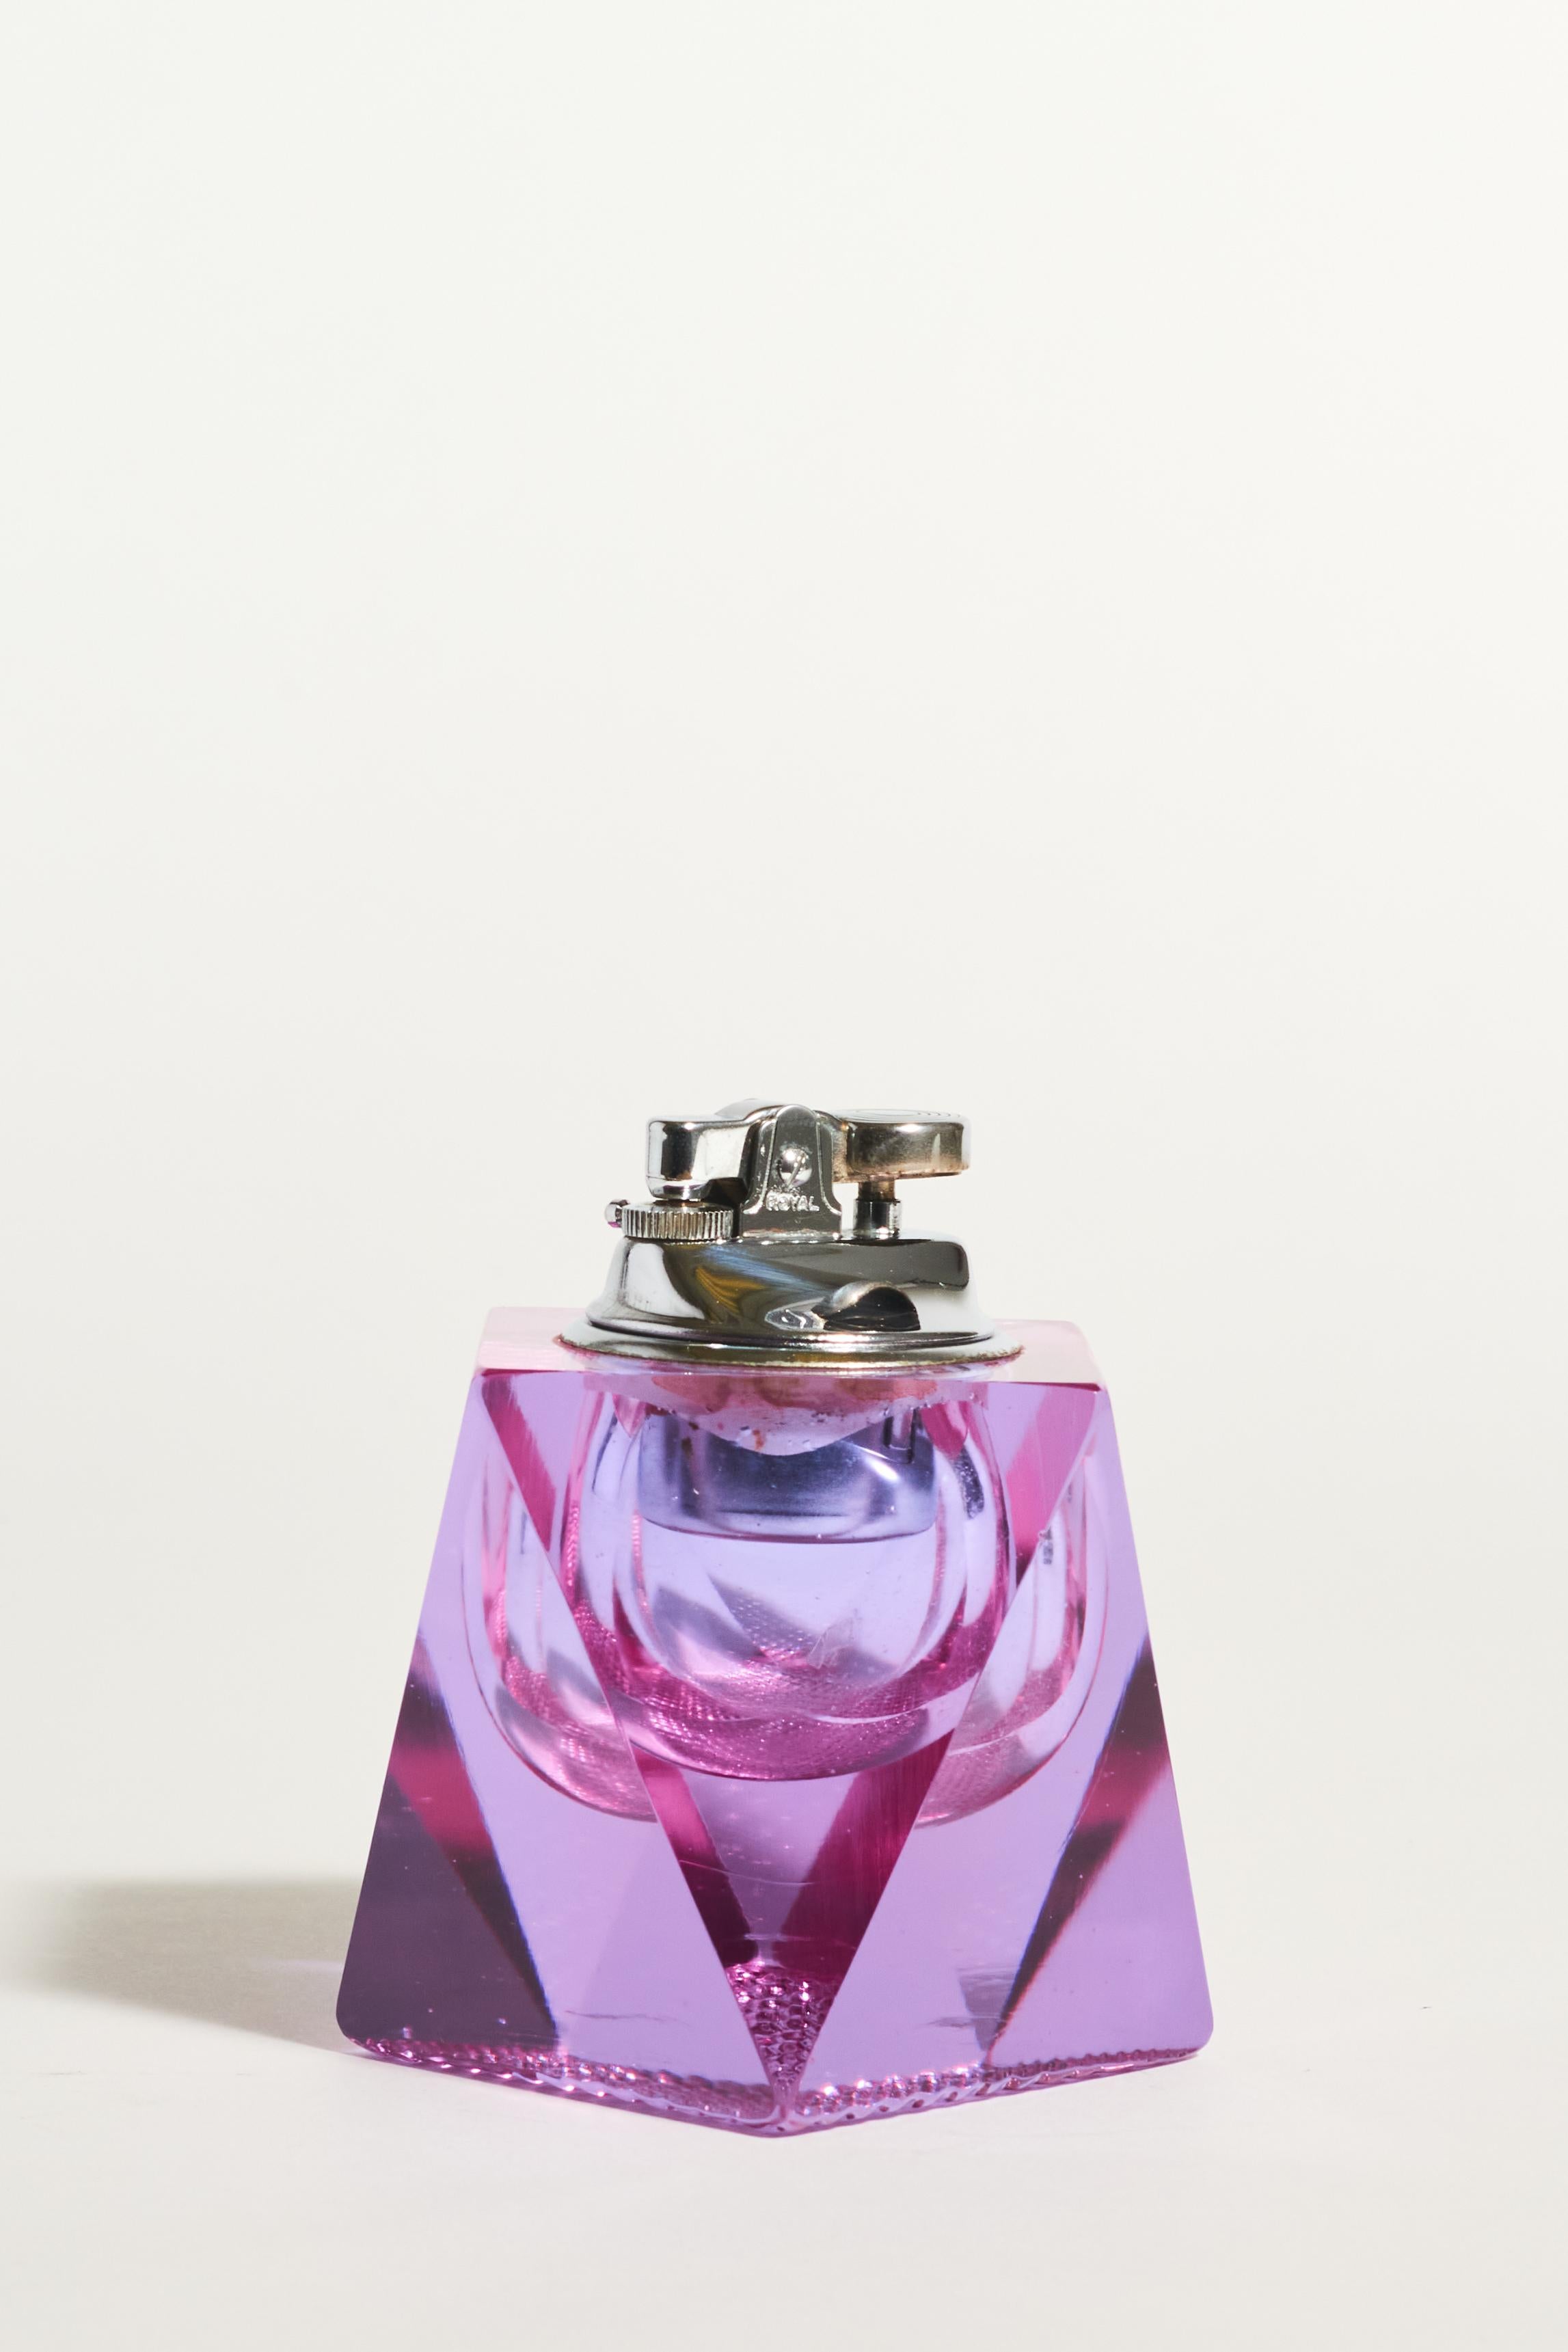 Italian lighter in geometric faceted lilac glass. 

*Lighters cannot be shipped with fluid inside because it is considered a hazardous material, but we have taken the lighter in to get checked and were told it could be in working condition if you